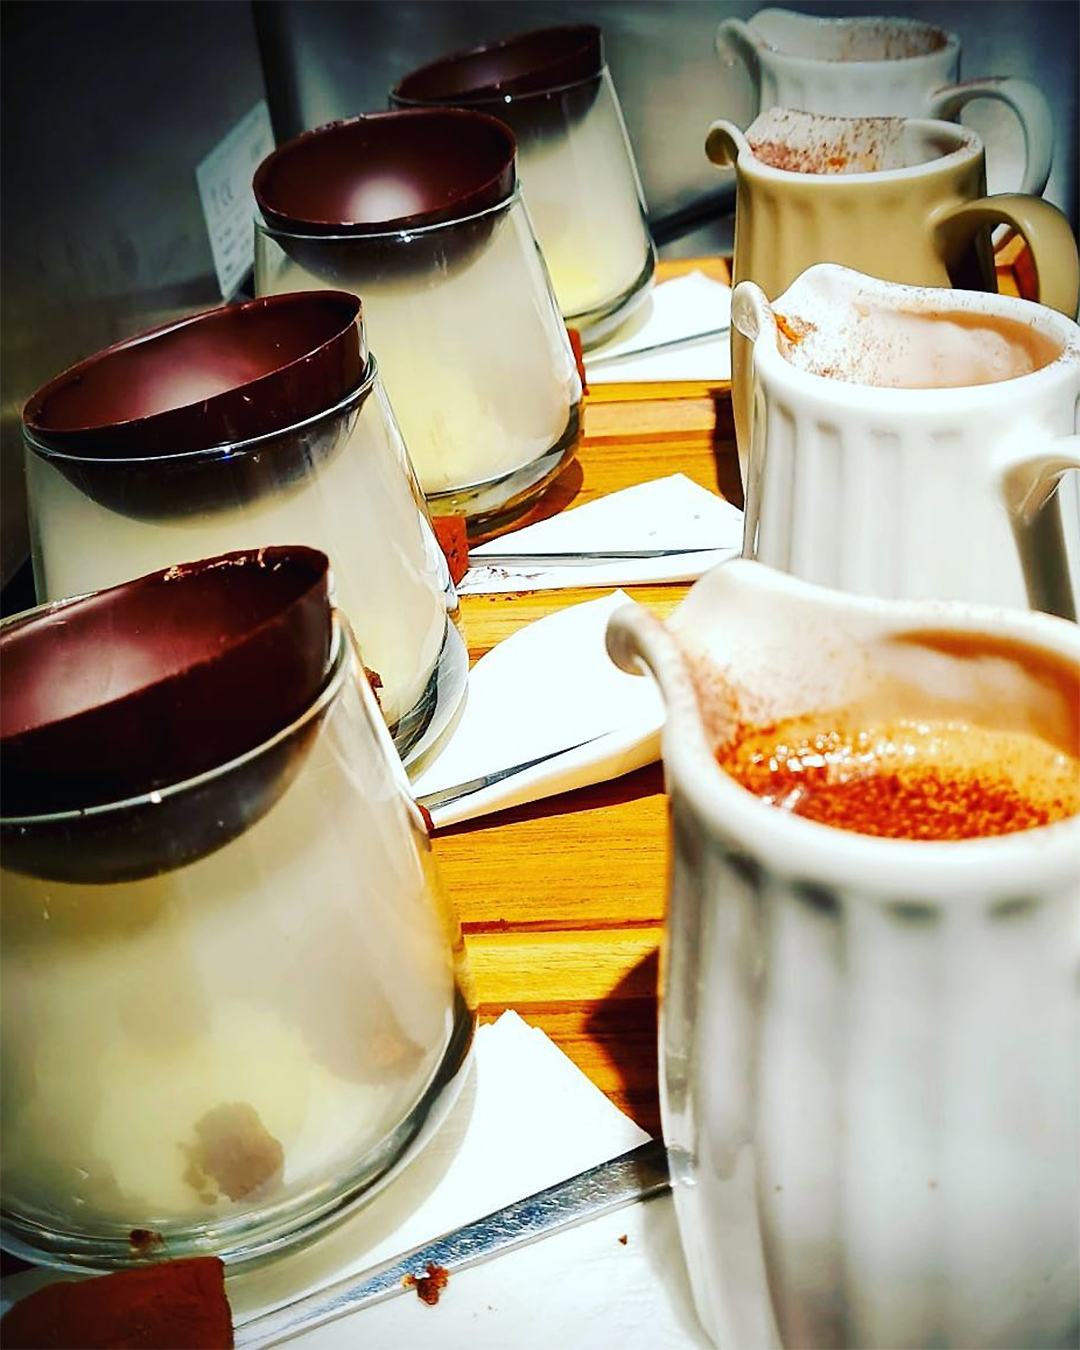 The smoked hot chocolate at Miann all lined up on a tray.